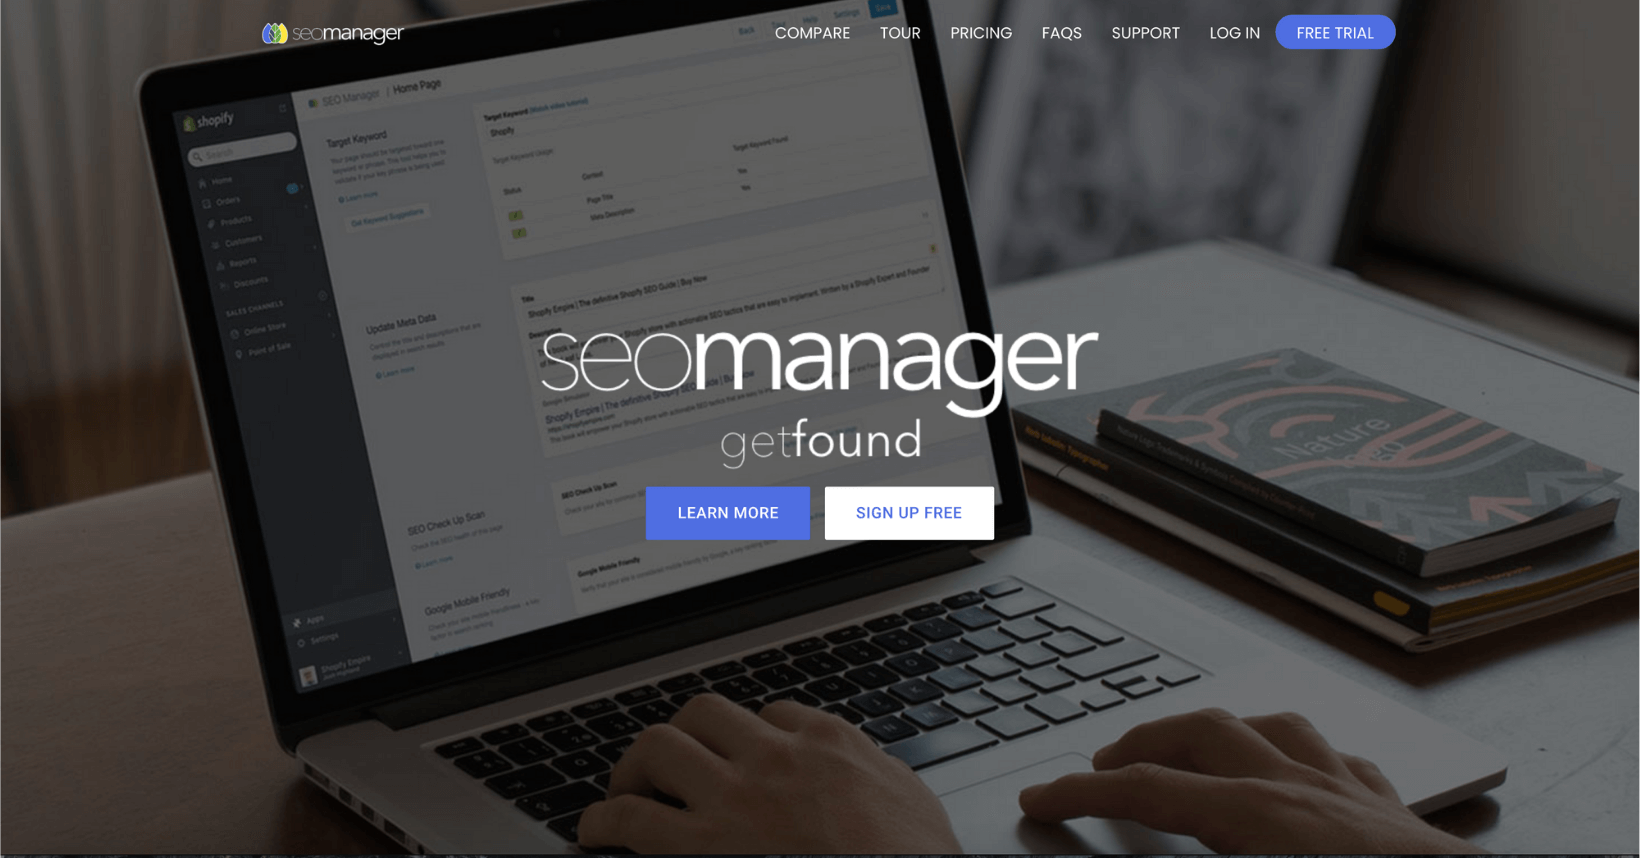 SEO Manager search optimization app